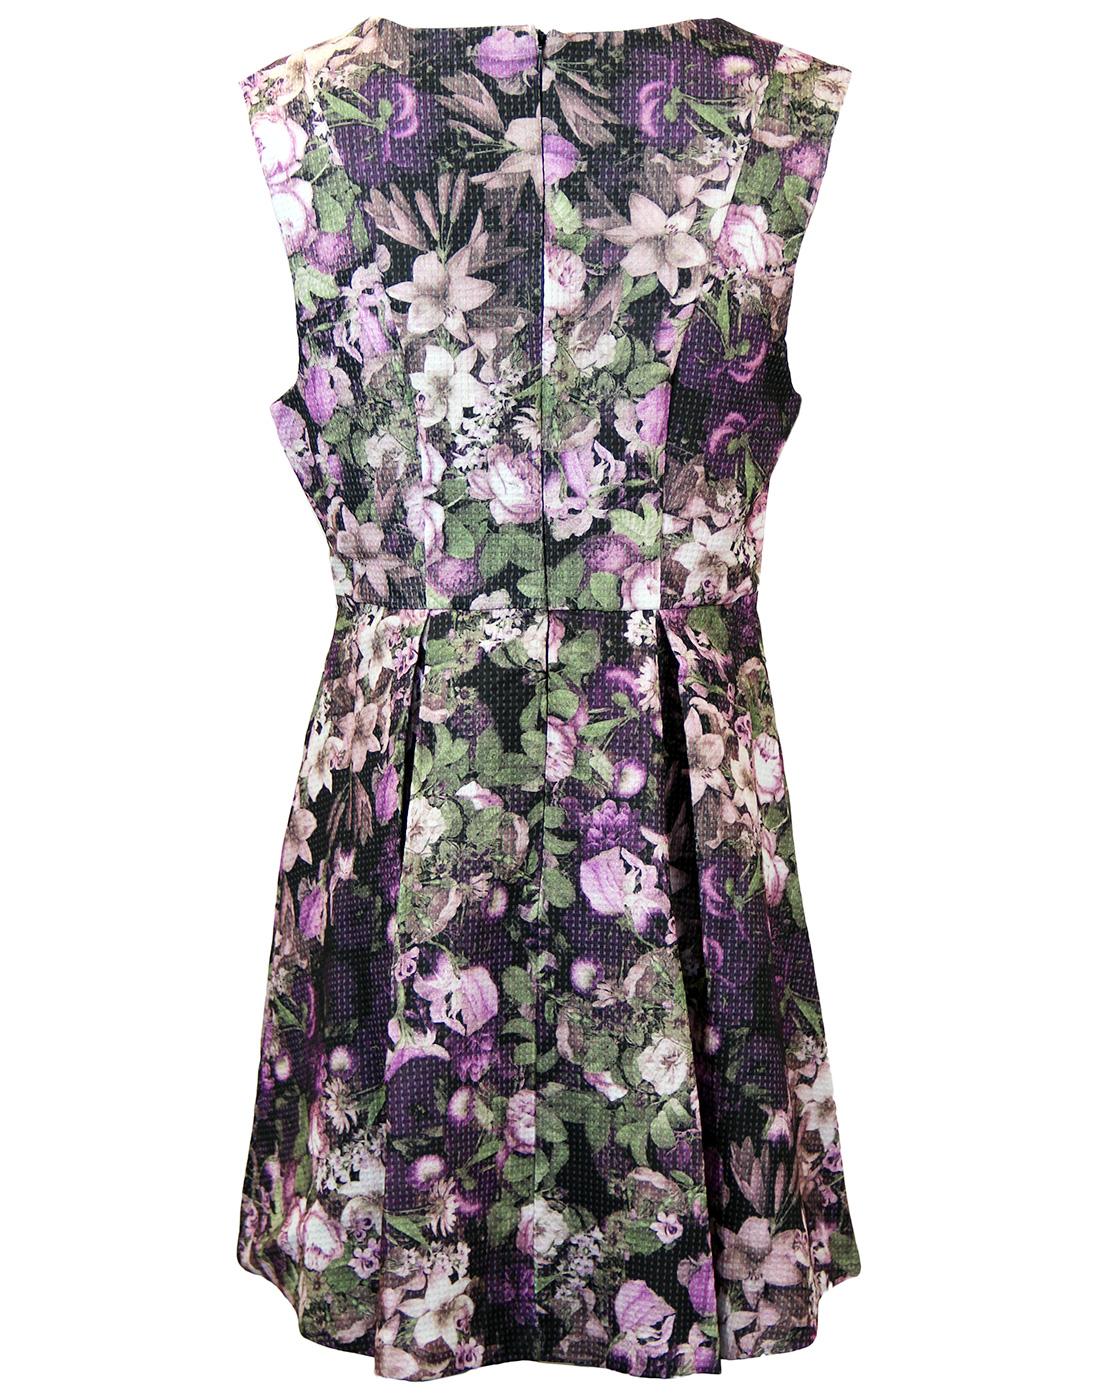 DARLING Sian Vintage Textured Floral Dress in Berry